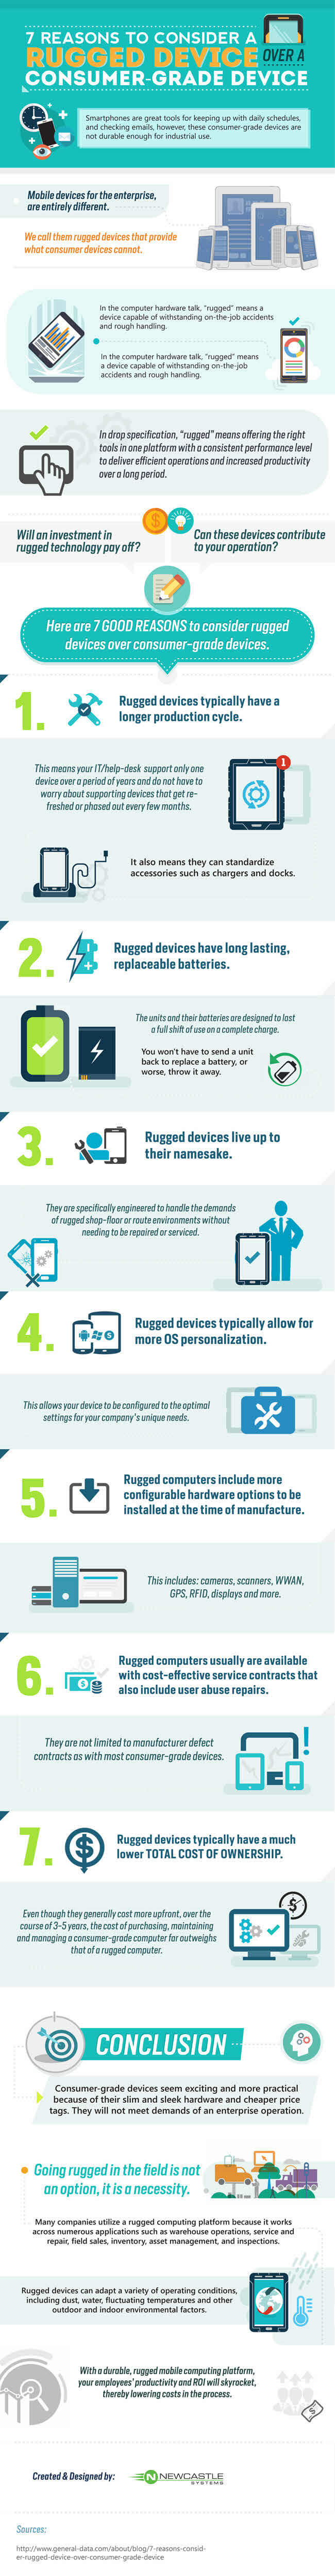 7-Reasons-to-Consider-A-Rugged-Device-Over-A-Consumer-Grade-Device-2-650x4991